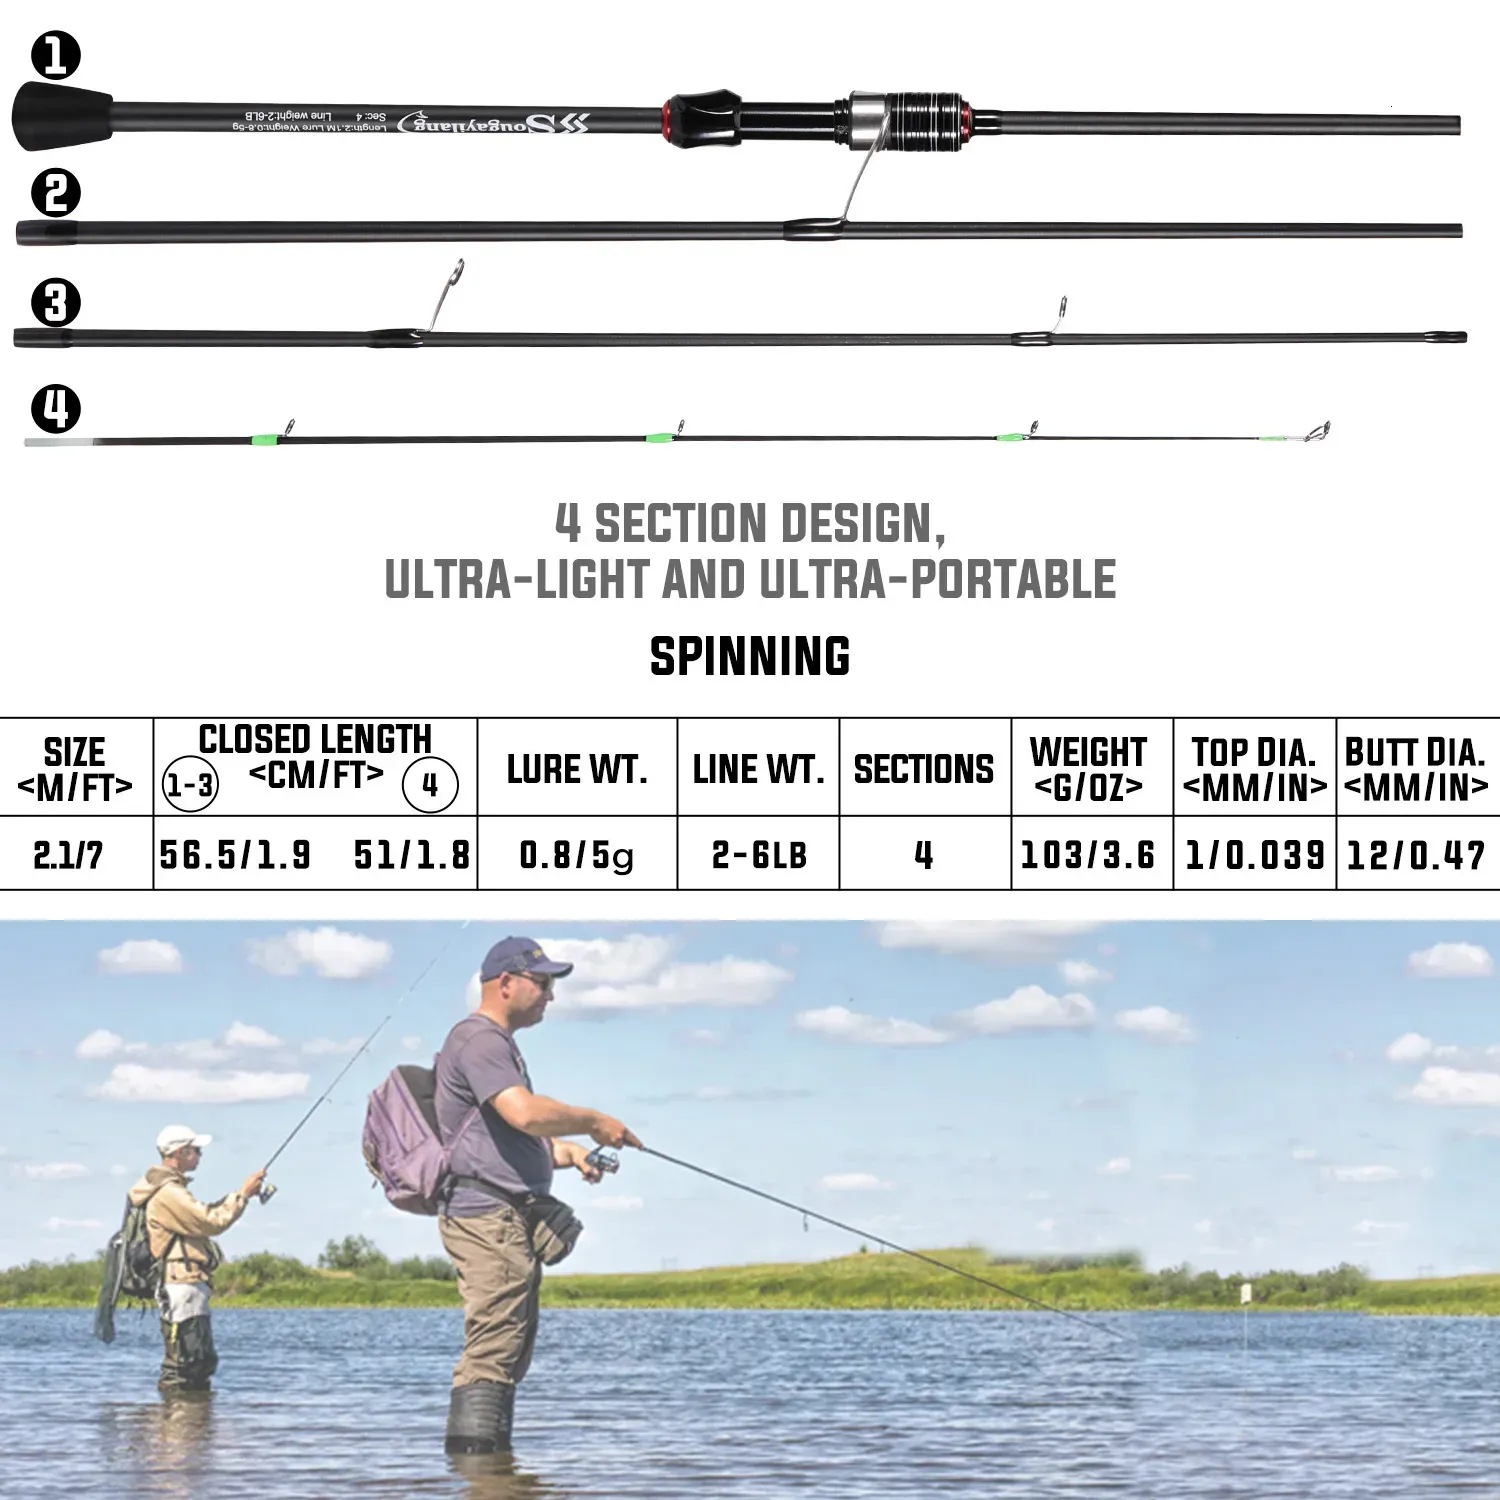 Sougayilang Boat Spinning Rod Lightweight Sensitive Trout, Crappie, Spinning  Casting Fishing 1.8m, 2.1m Length, 0.5 5g Weight Model 231109 From Bao06,  $16.21, crappie fishing rods 